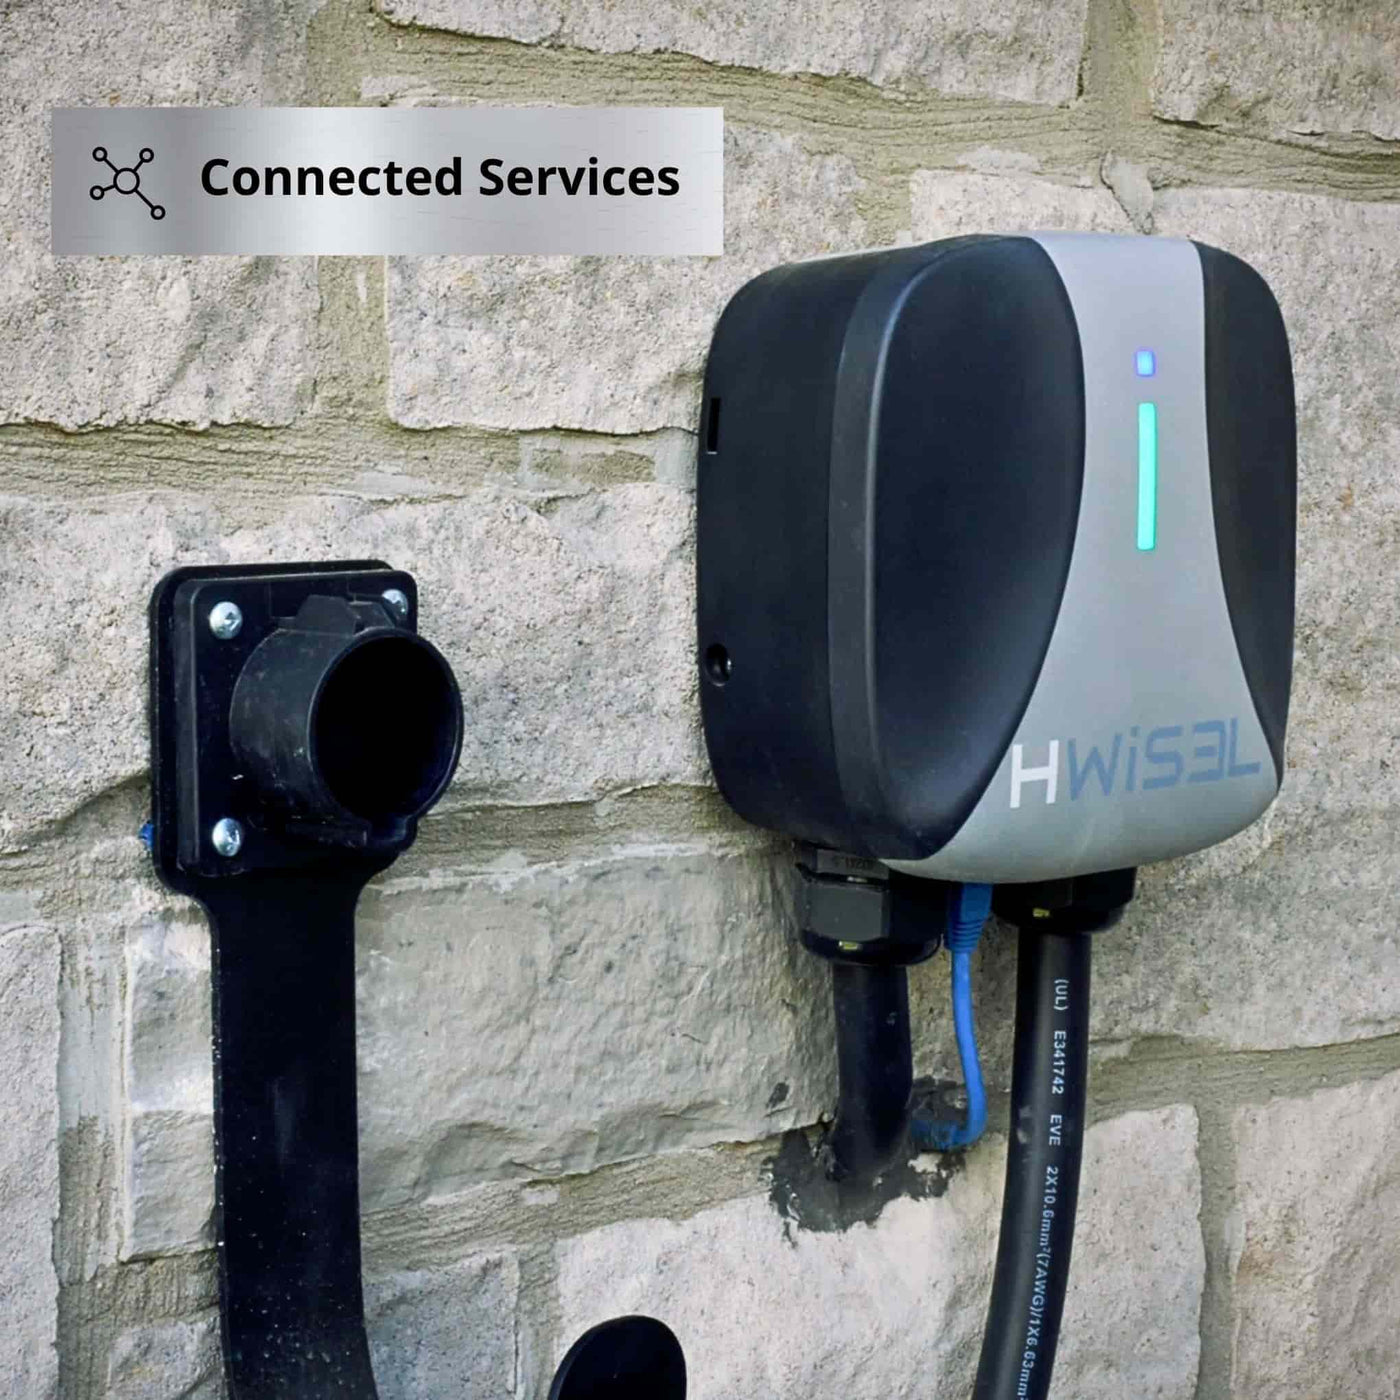 Charger Vip Plan_HWisel HEVC19 Smart Charging Station, Connected Services Available, Image Size 2040x2040